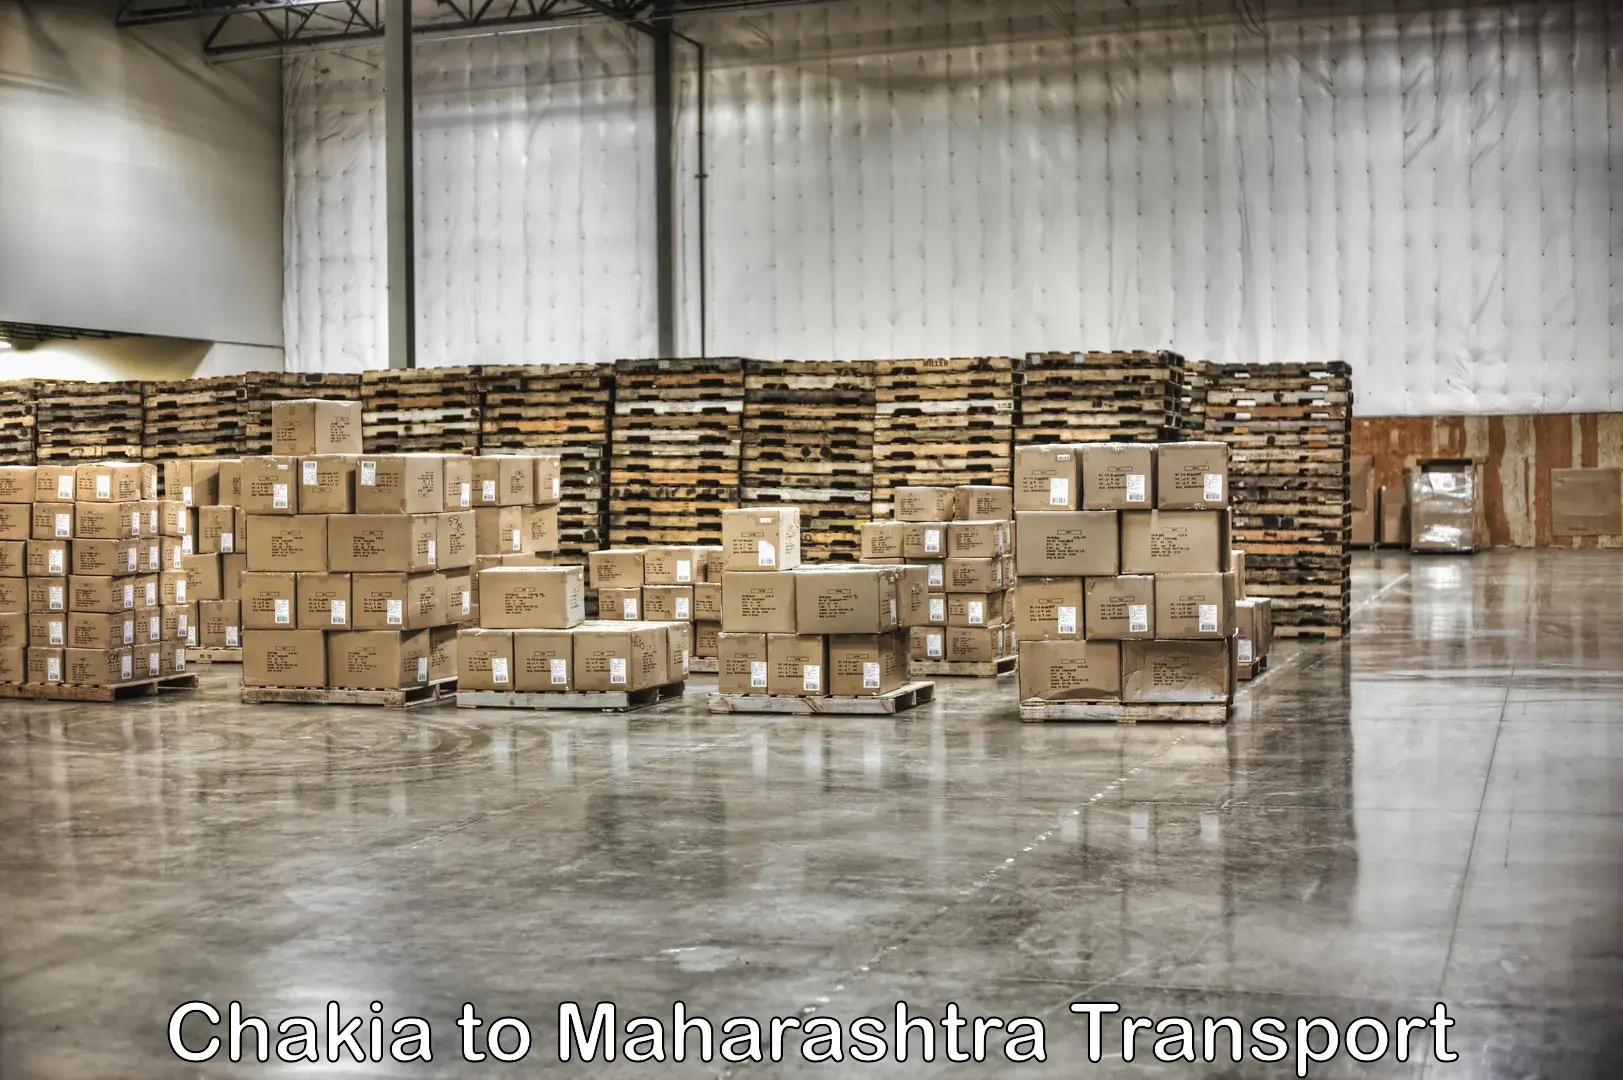 Air freight transport services in Chakia to Kale Kolhapur